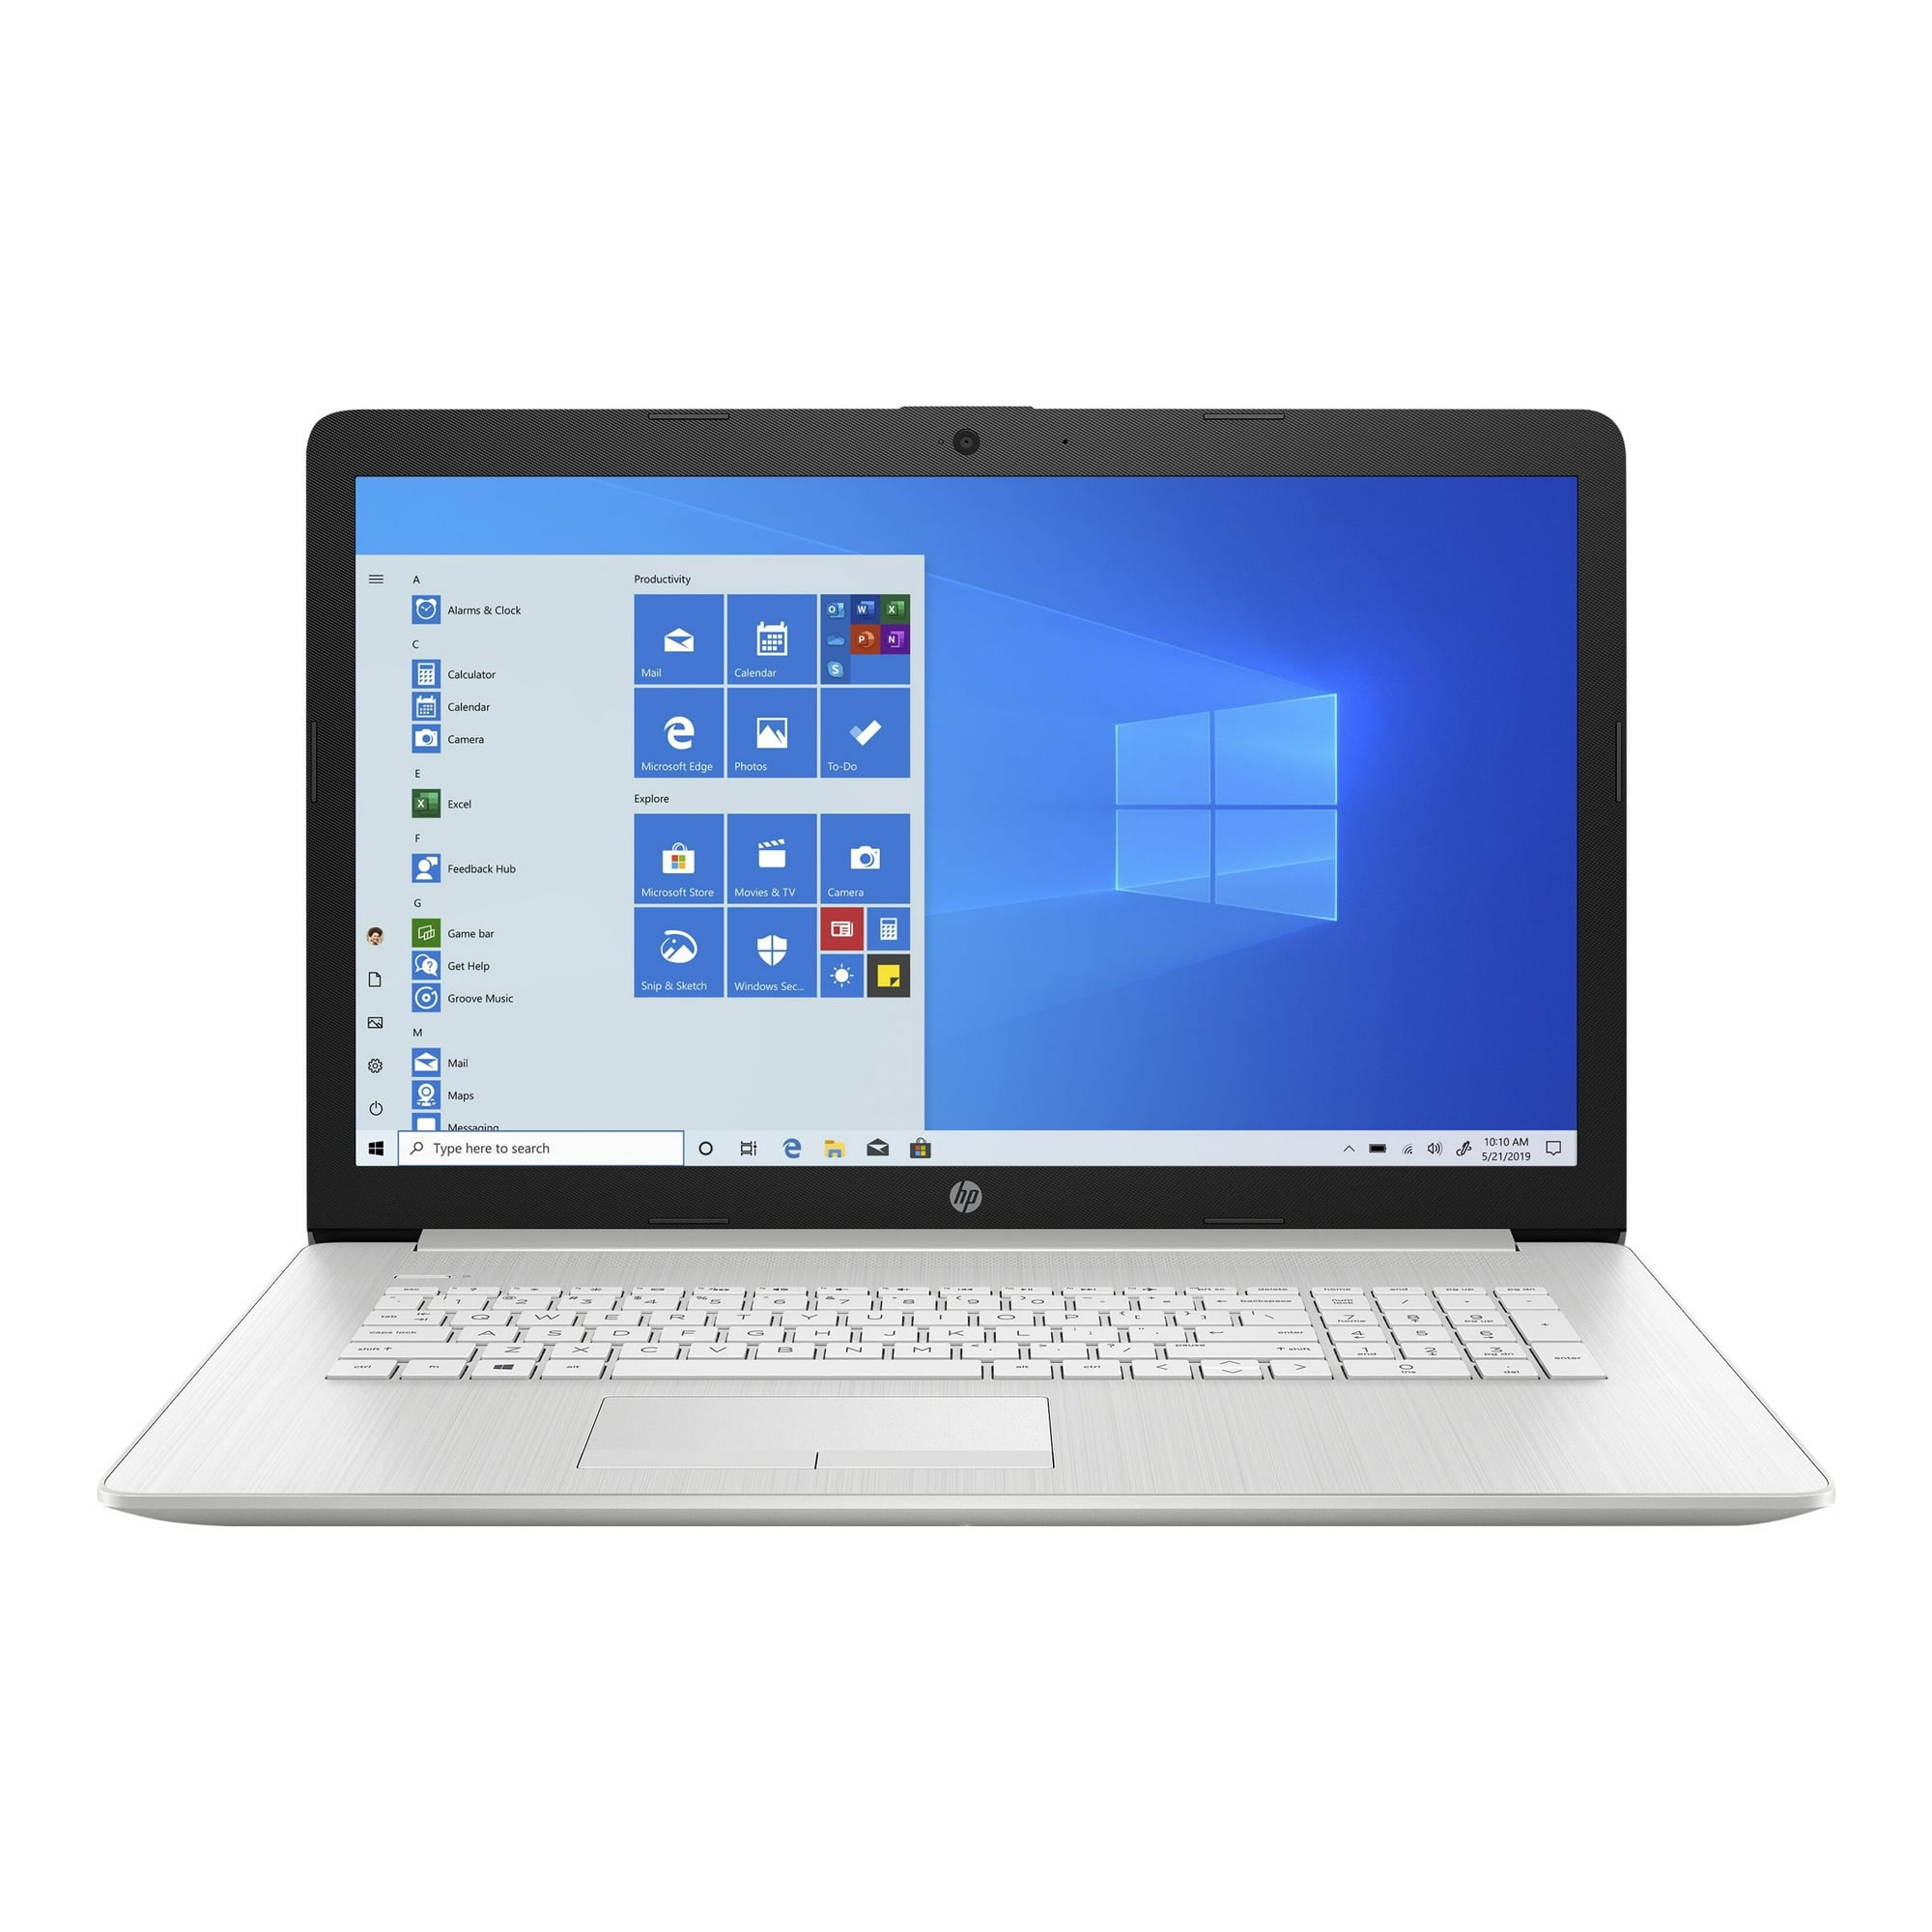 HP 17-by4013dx 17.3" HD+ LED Display Intel Core i3-1115G4 8GB DDR4 SDRAM 256GB SSD No Optical Drive Windows 11 Home in S Mode Silver